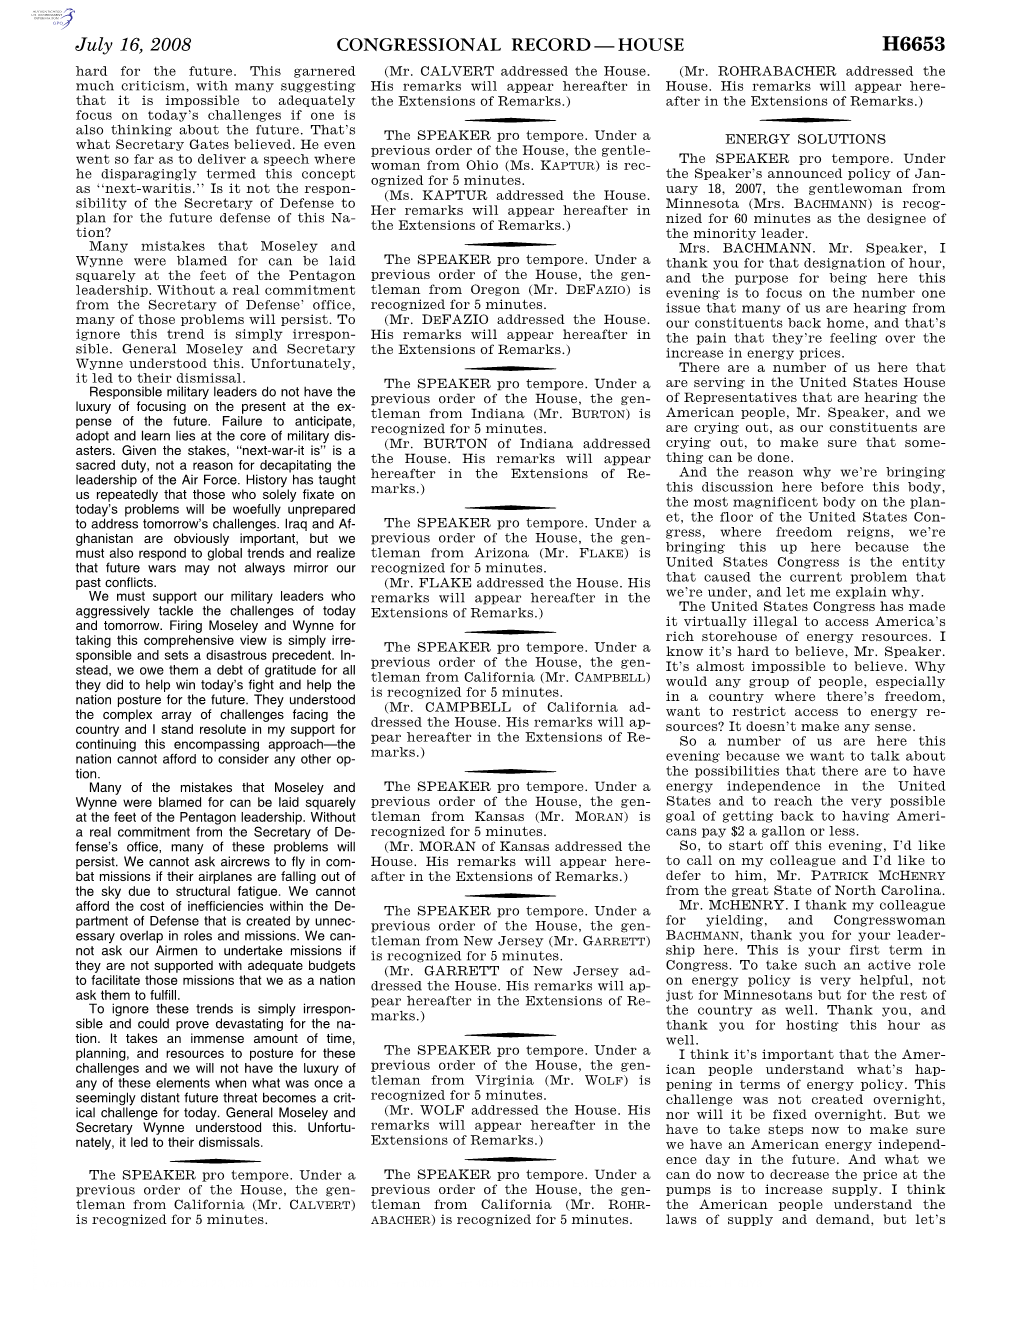 Congressional Record—House H6653